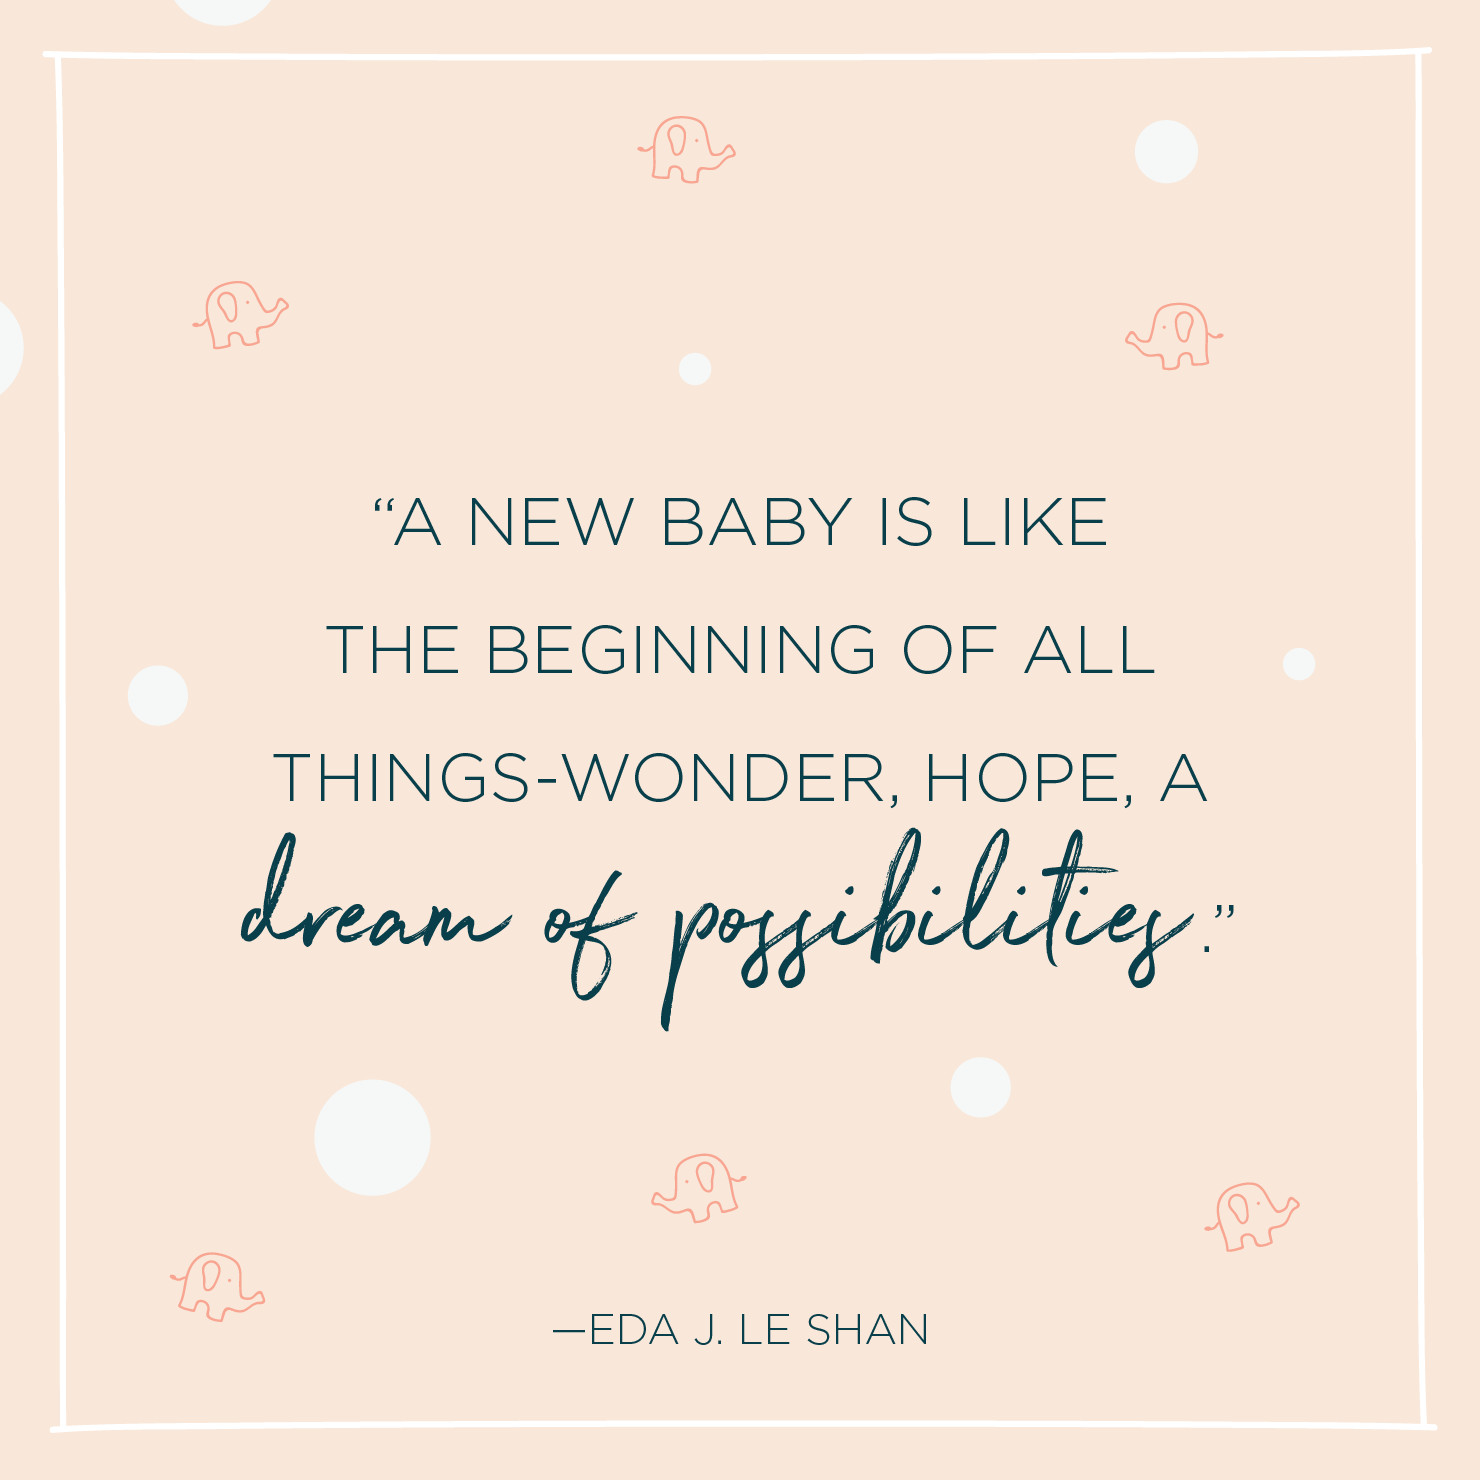 Inspirational Baby Shower Quotes
 84 Inspirational Baby Quotes and Sayings